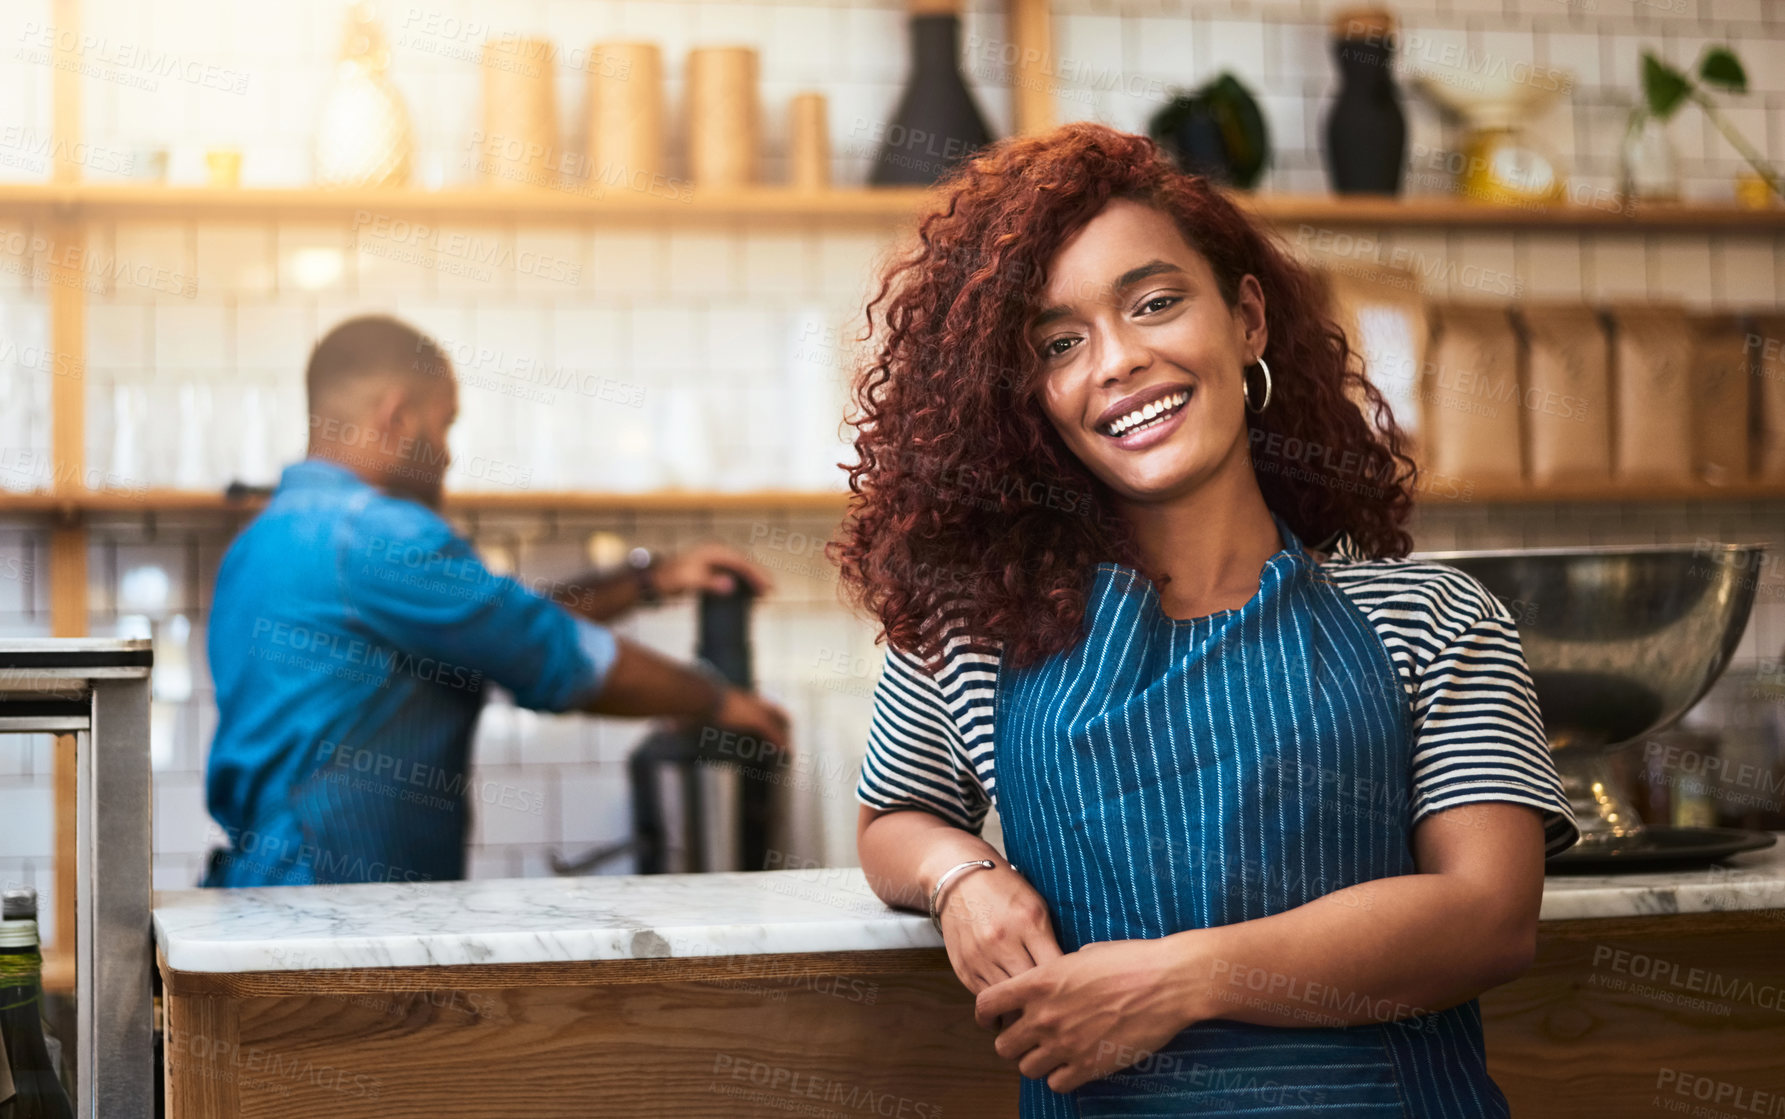 Buy stock photo Cropped portrait of an attractive young woman standing in her coffee shop